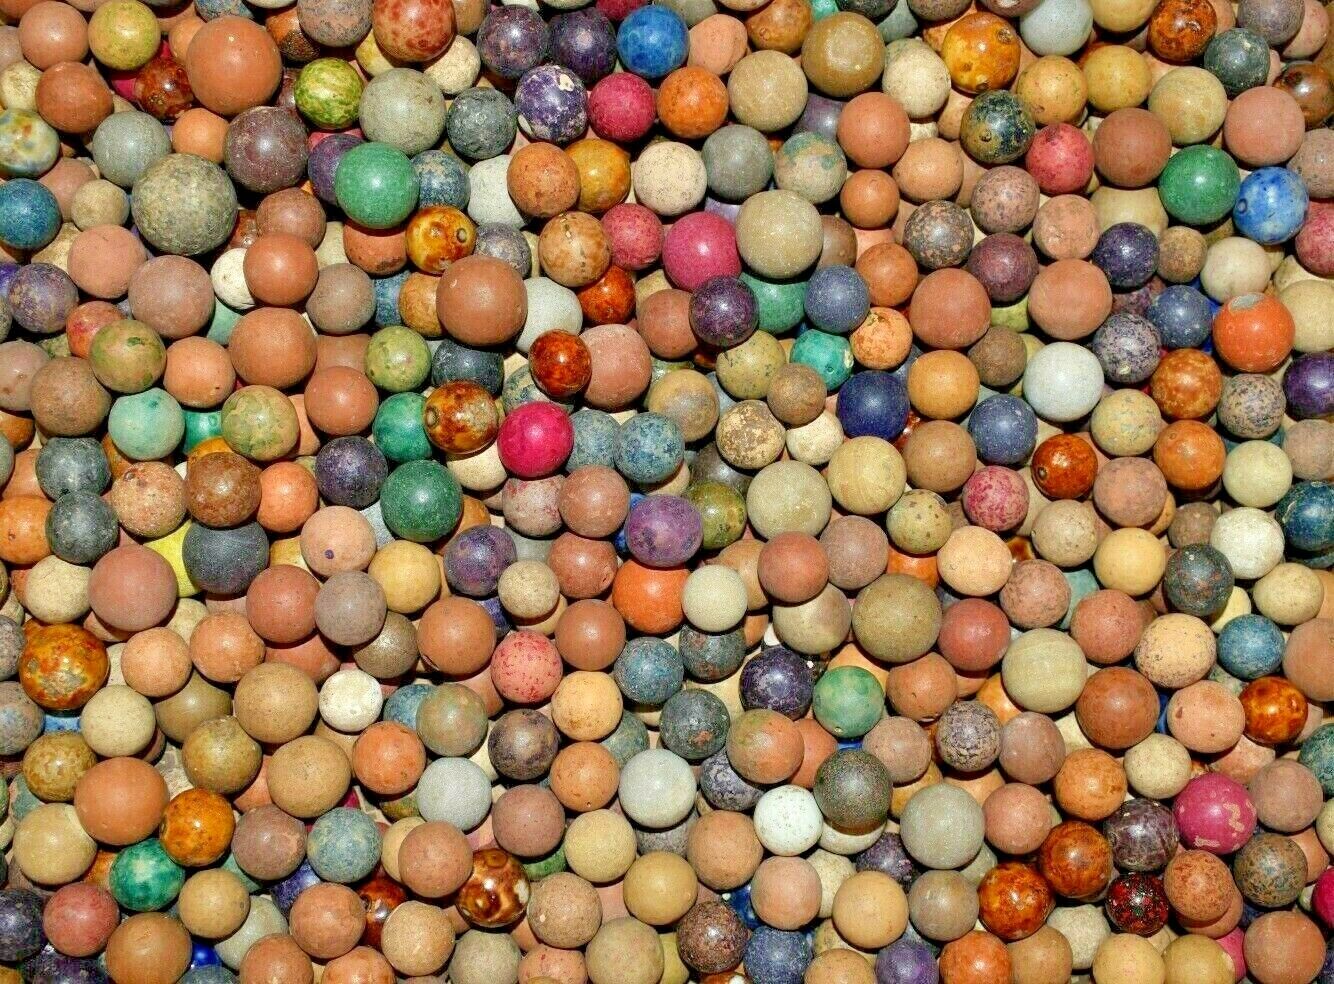 Antique 1800s Civil War era Clay Marbles Lot of 12 Size .500=1/2" + or - Mint! Commies